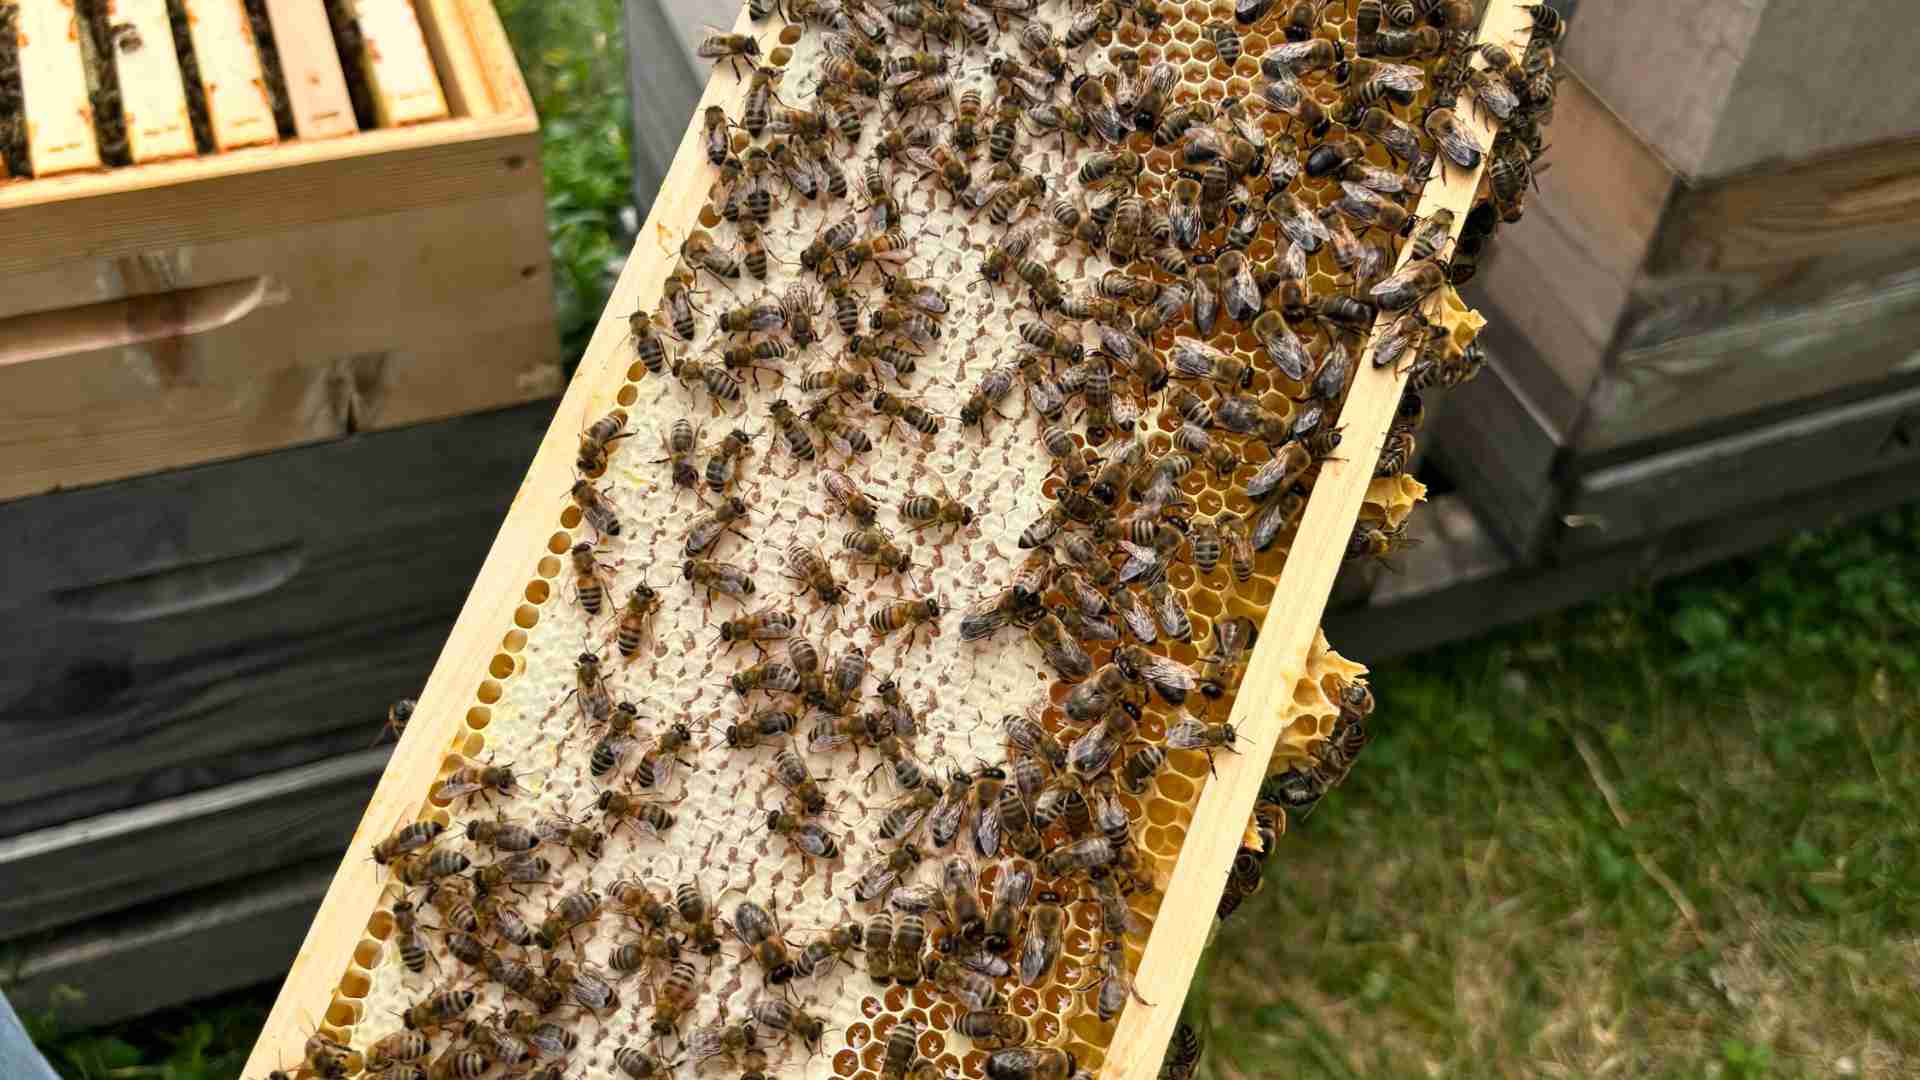 PROJECT 2028: How hectares of nectar are revolutionizing the bee population